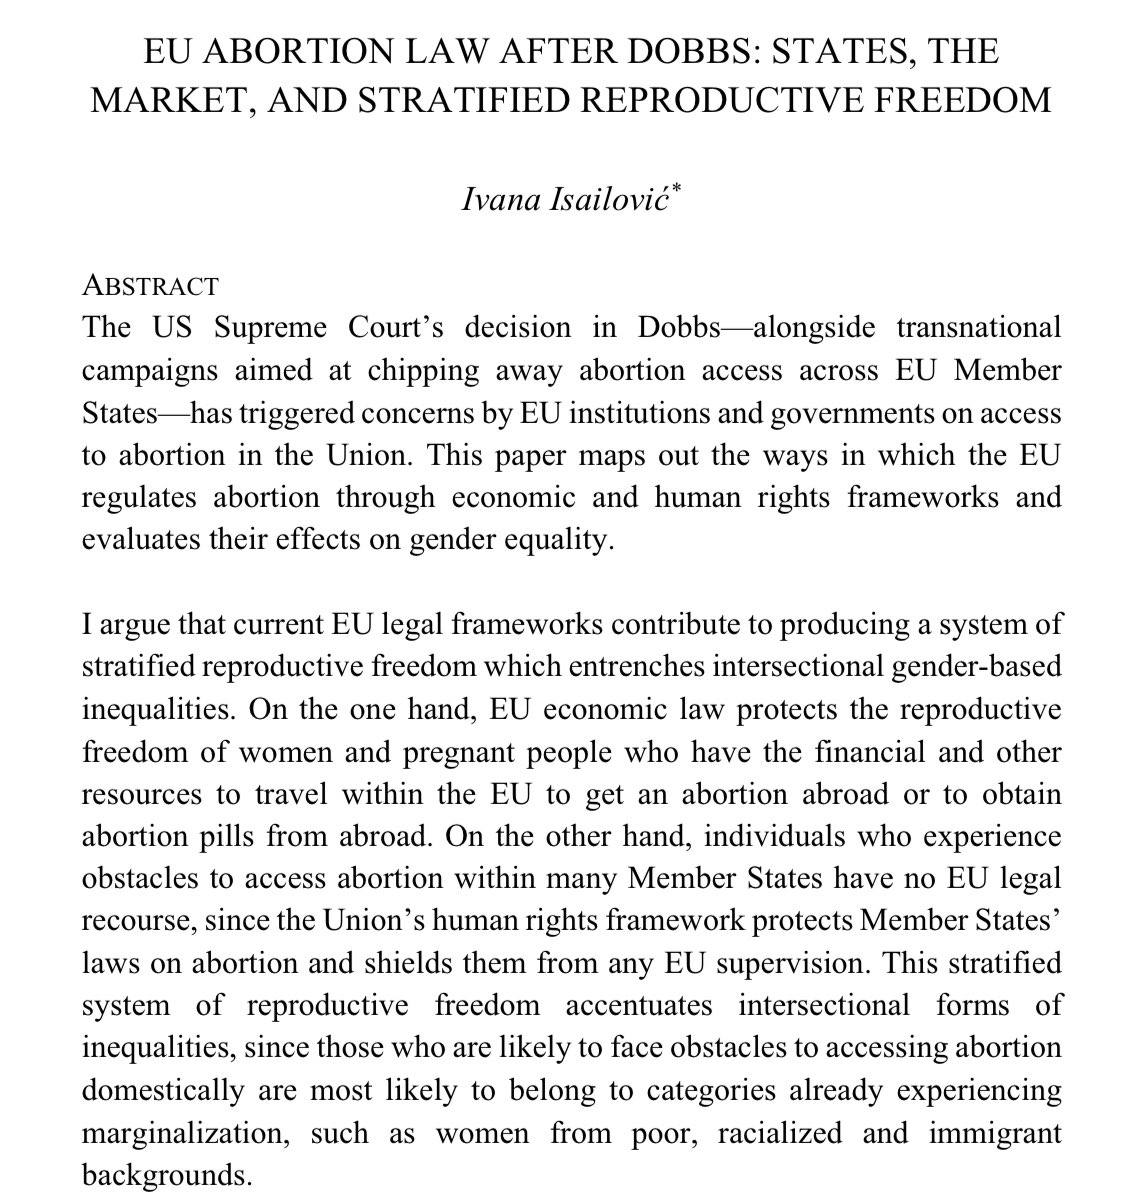 I wrote a (working) paper on abortion in EU law that shows how EU law contributes to undermining gender and reproductive justice and equality.